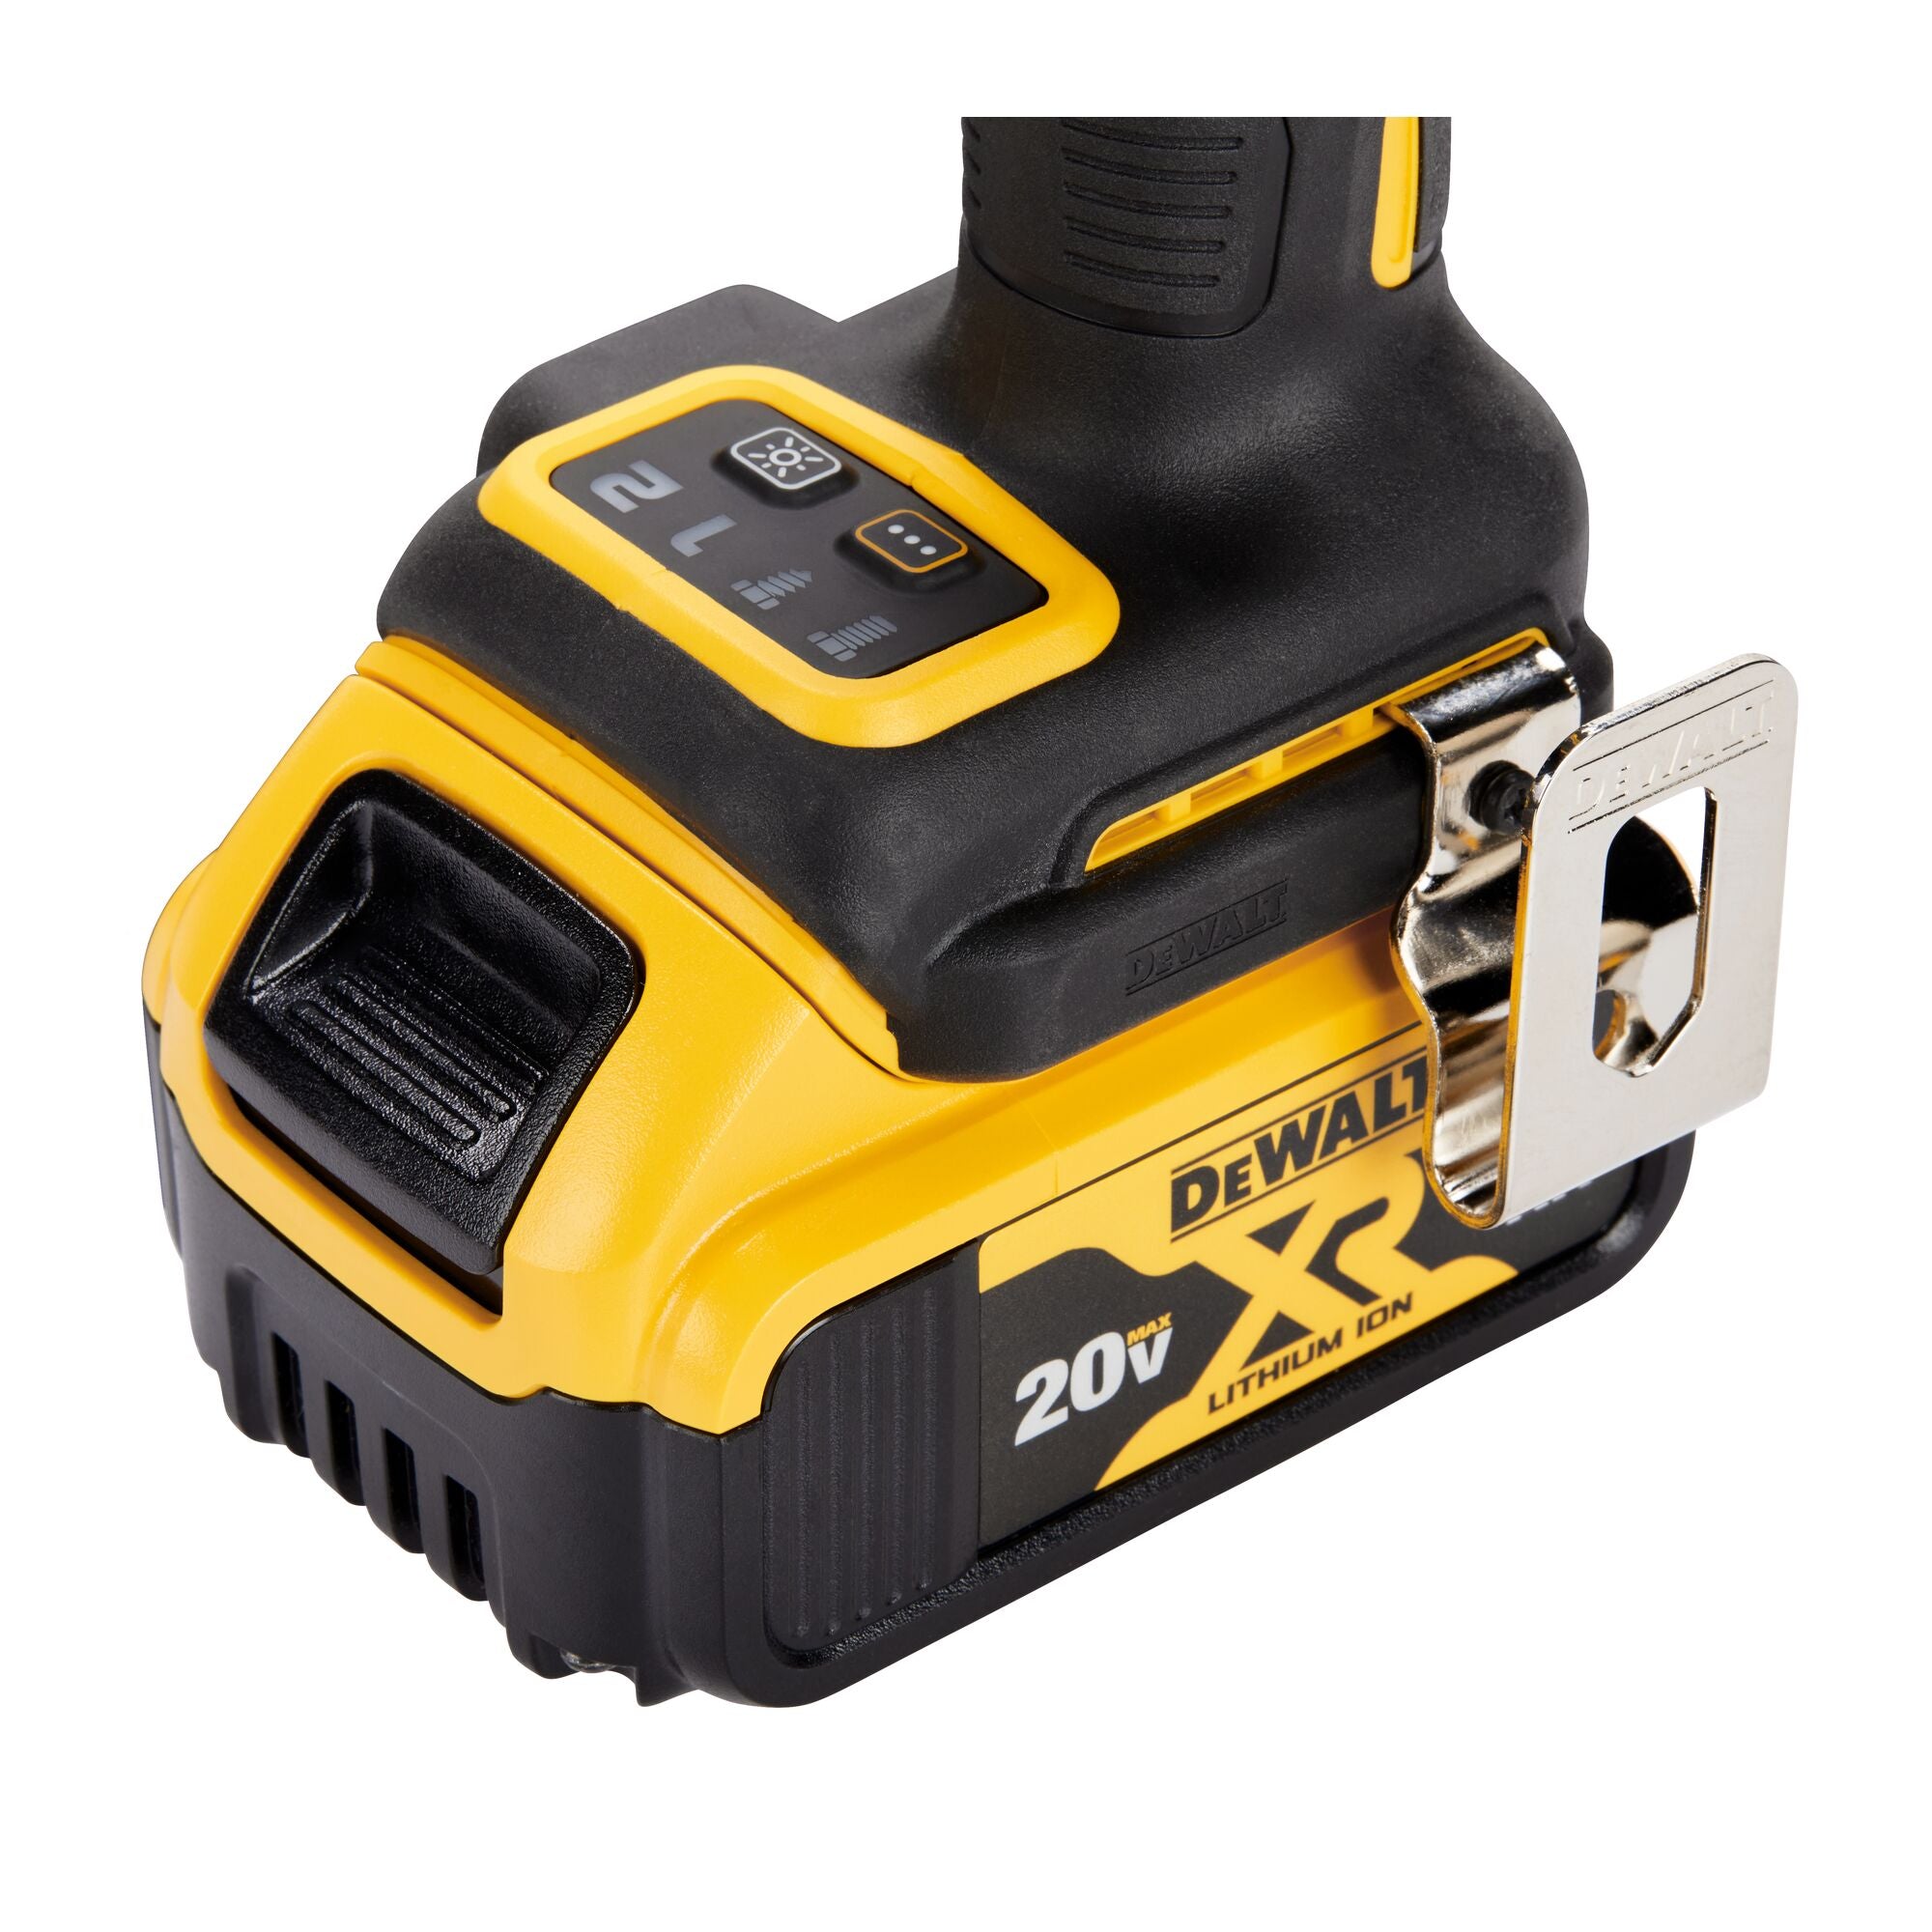 DEWALT DCF921P2 ATOMIC 20V MAX Lithium-Ion Brushless Cordless Compact 1/2" Impact Wrench with Hog Ring Anvil Kit 5.0 Ah